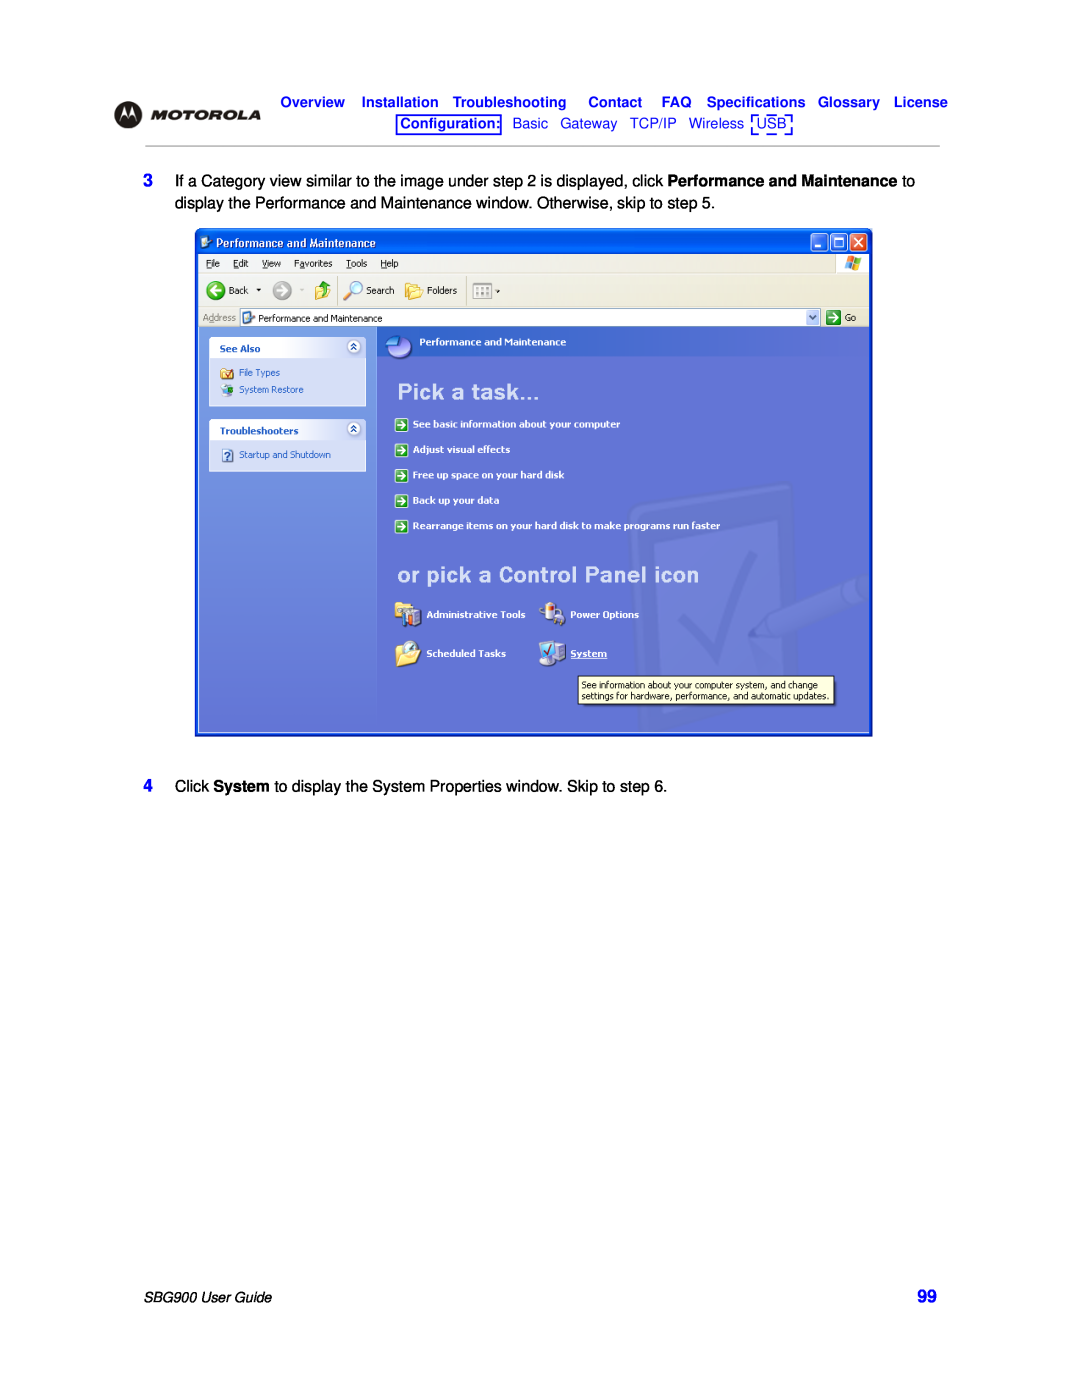 Motorola manual Click System to display the System Properties window. Skip to step, SBG900 User Guide 